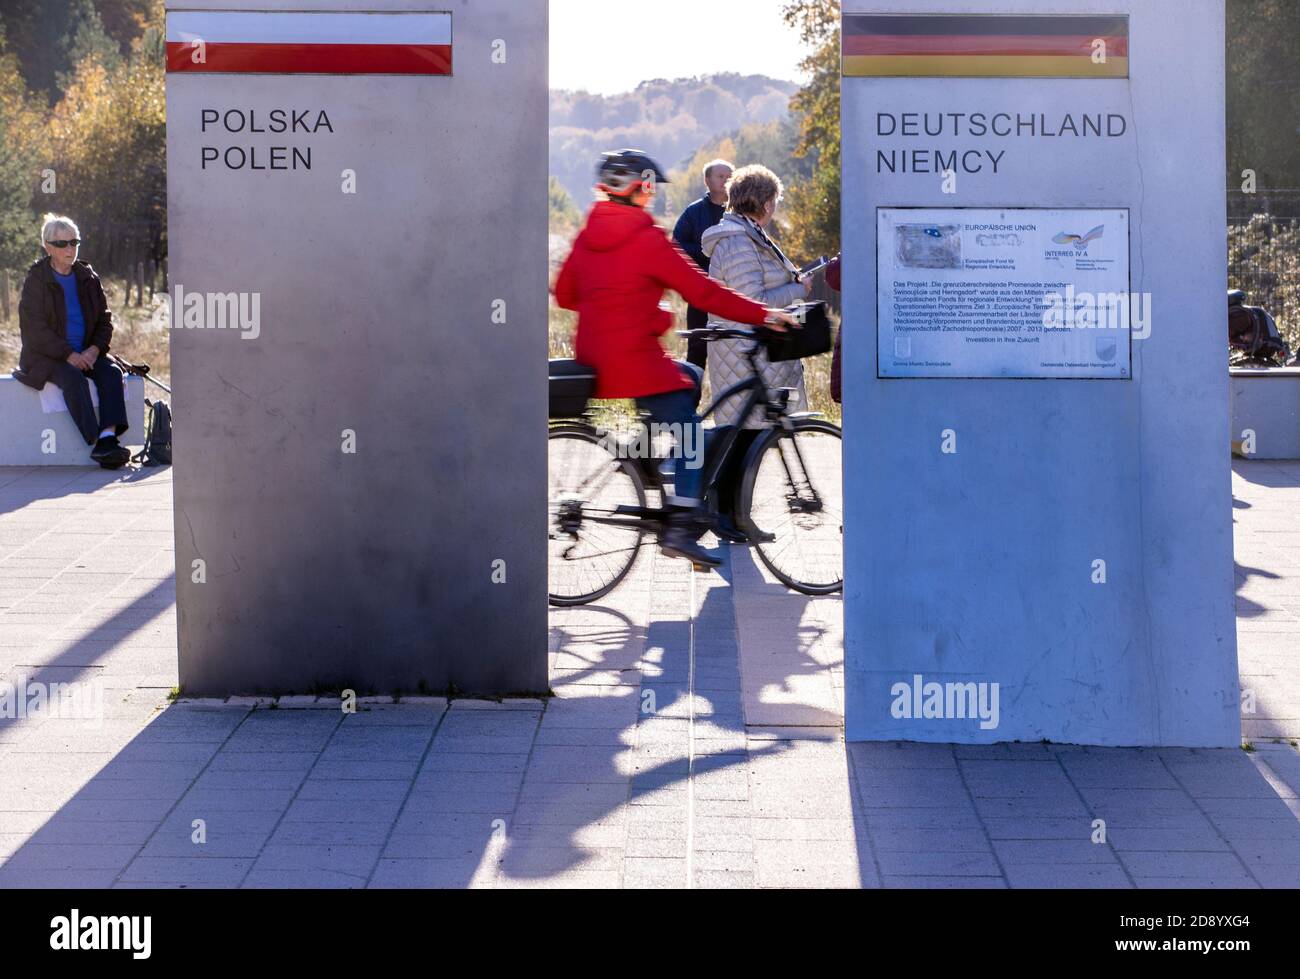 Ahlbeck, Germany. 22nd Oct, 2020. Cyclists and holidaymakers pass the border between Poland and Germany on the promenade along the Baltic Sea coast on the island of Usedom. The German government has declared neighbouring Poland to be a corona risk area with effect from 24.10.2020. Credit: Jens Büttner/dpa-Zentralbild/ZB/dpa/Alamy Live News Stock Photo